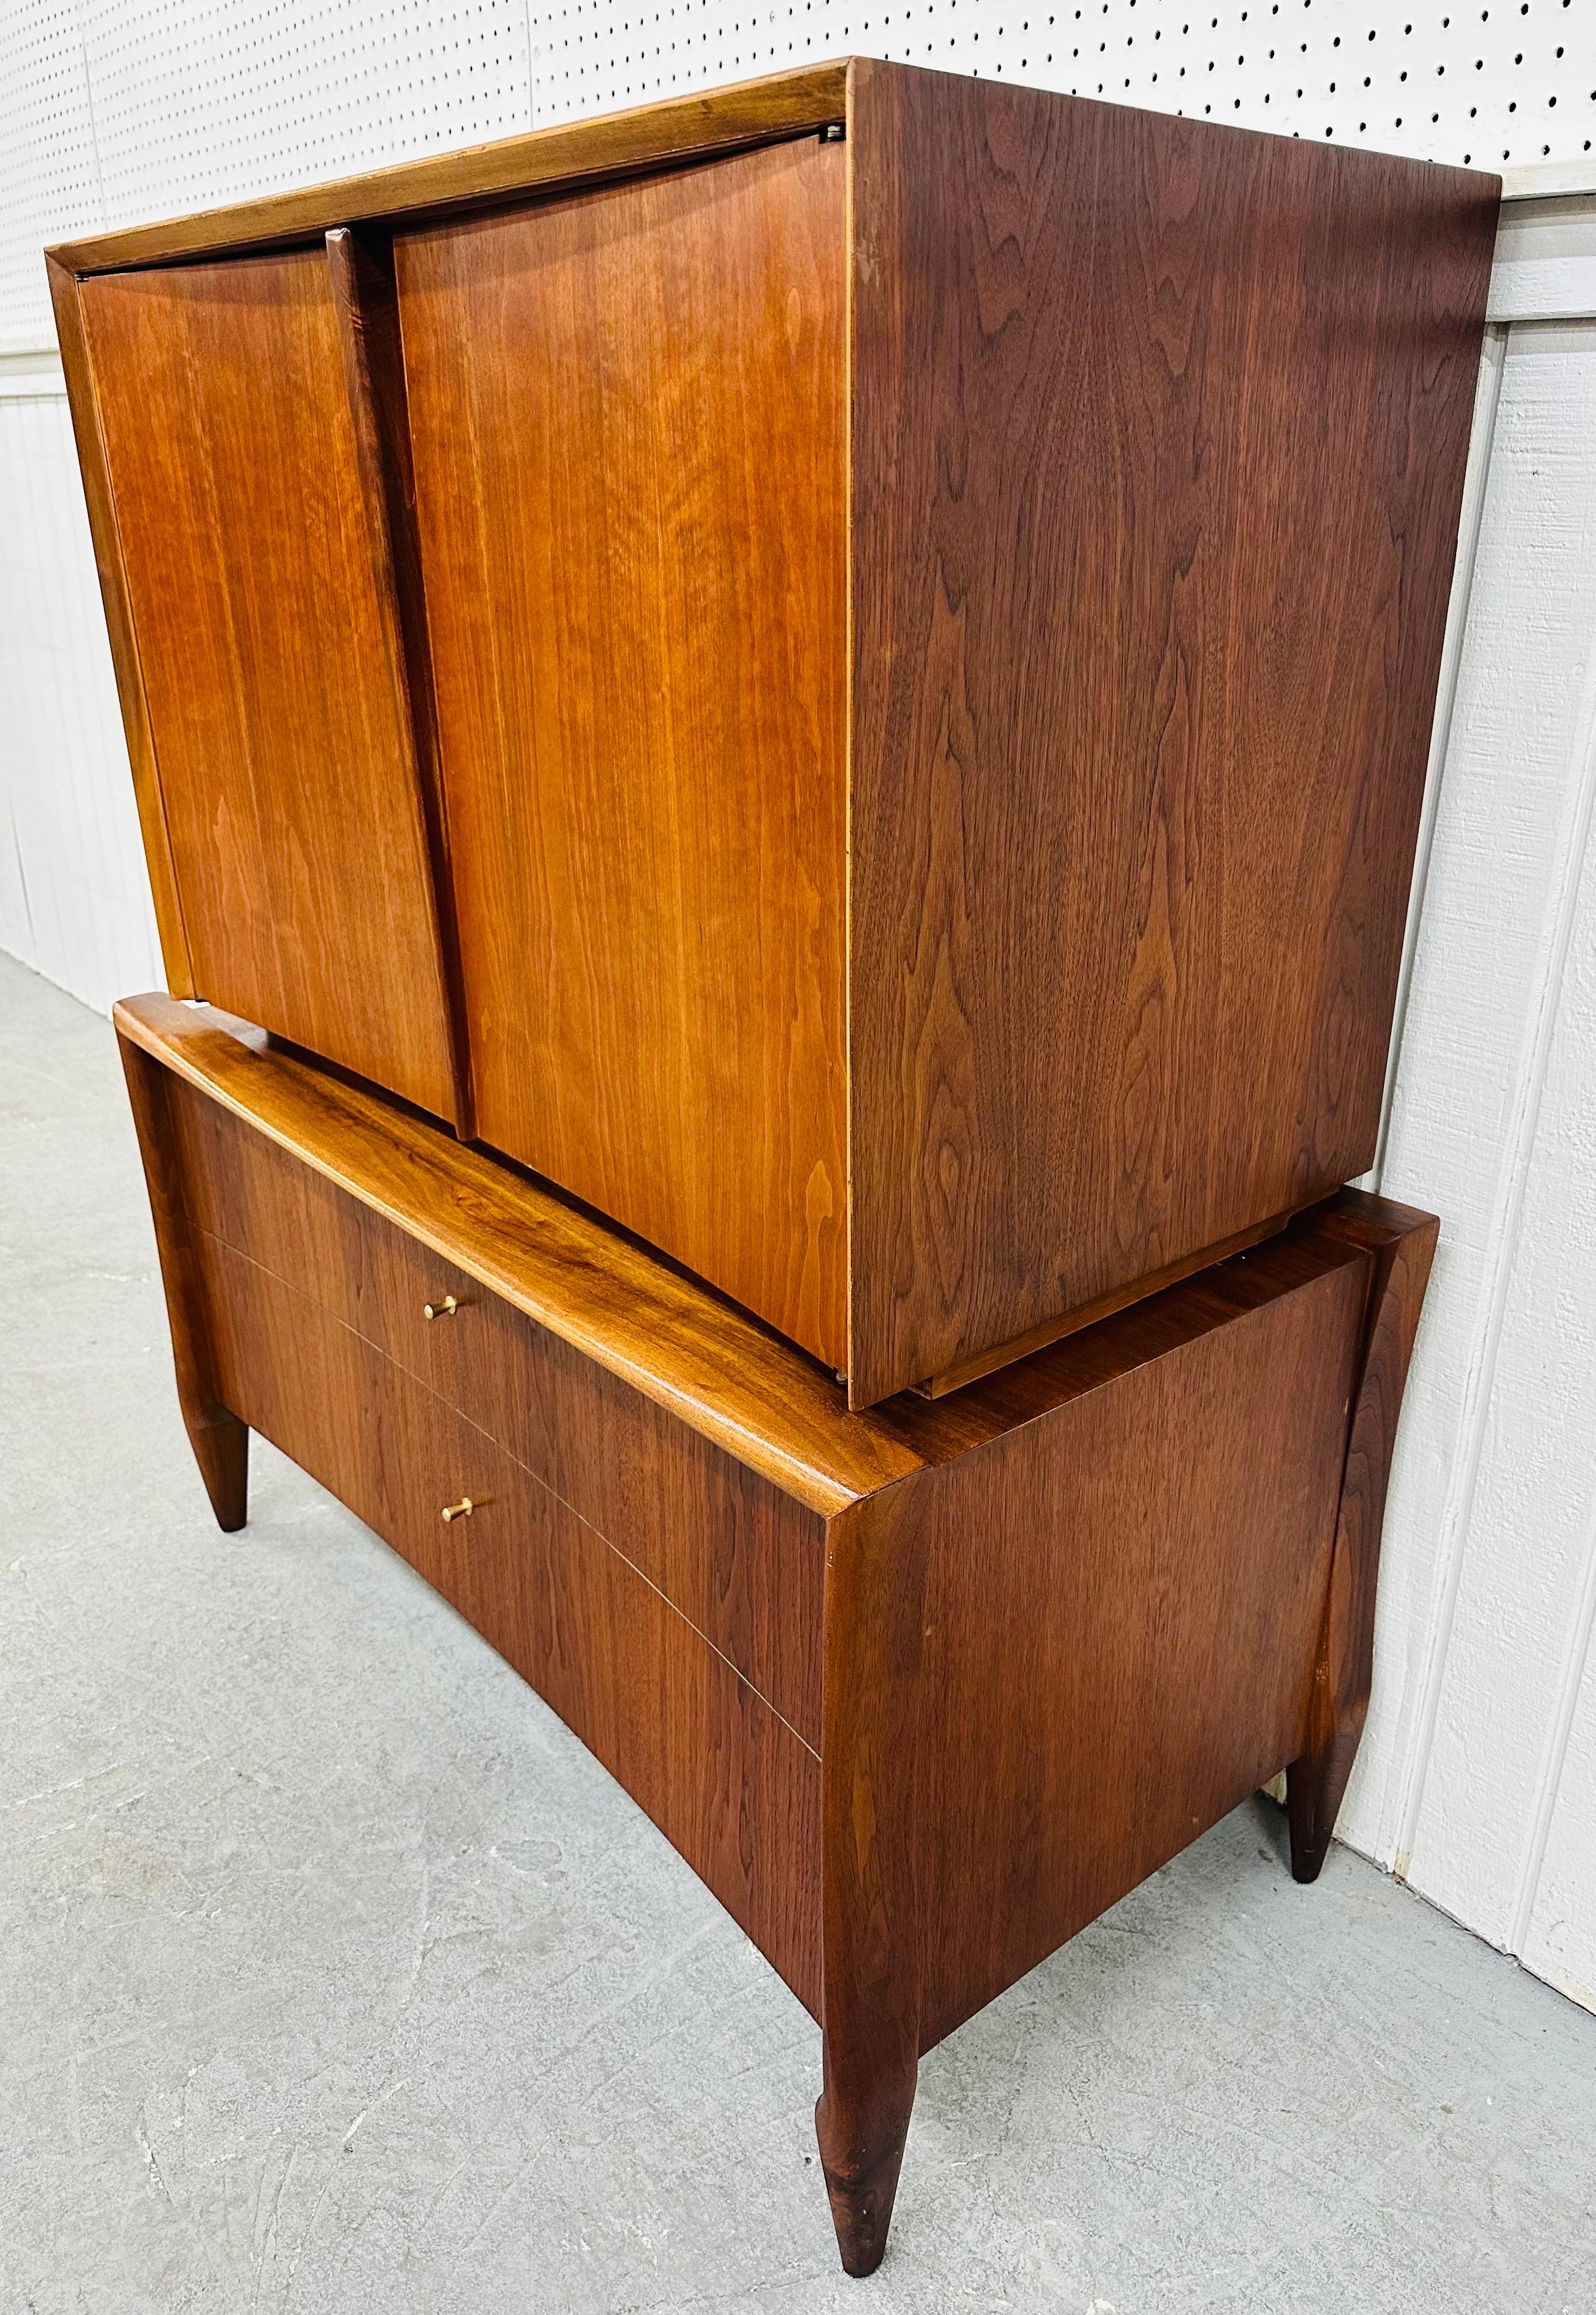 This listing is for a Mid-Century Modern Sculptural Walnut Gentlemen’s Chest. Featuring a straight line chest on chest design, two doors at the top that open up to three hidden drawers, two larger drawers at the bottom with original hardware,